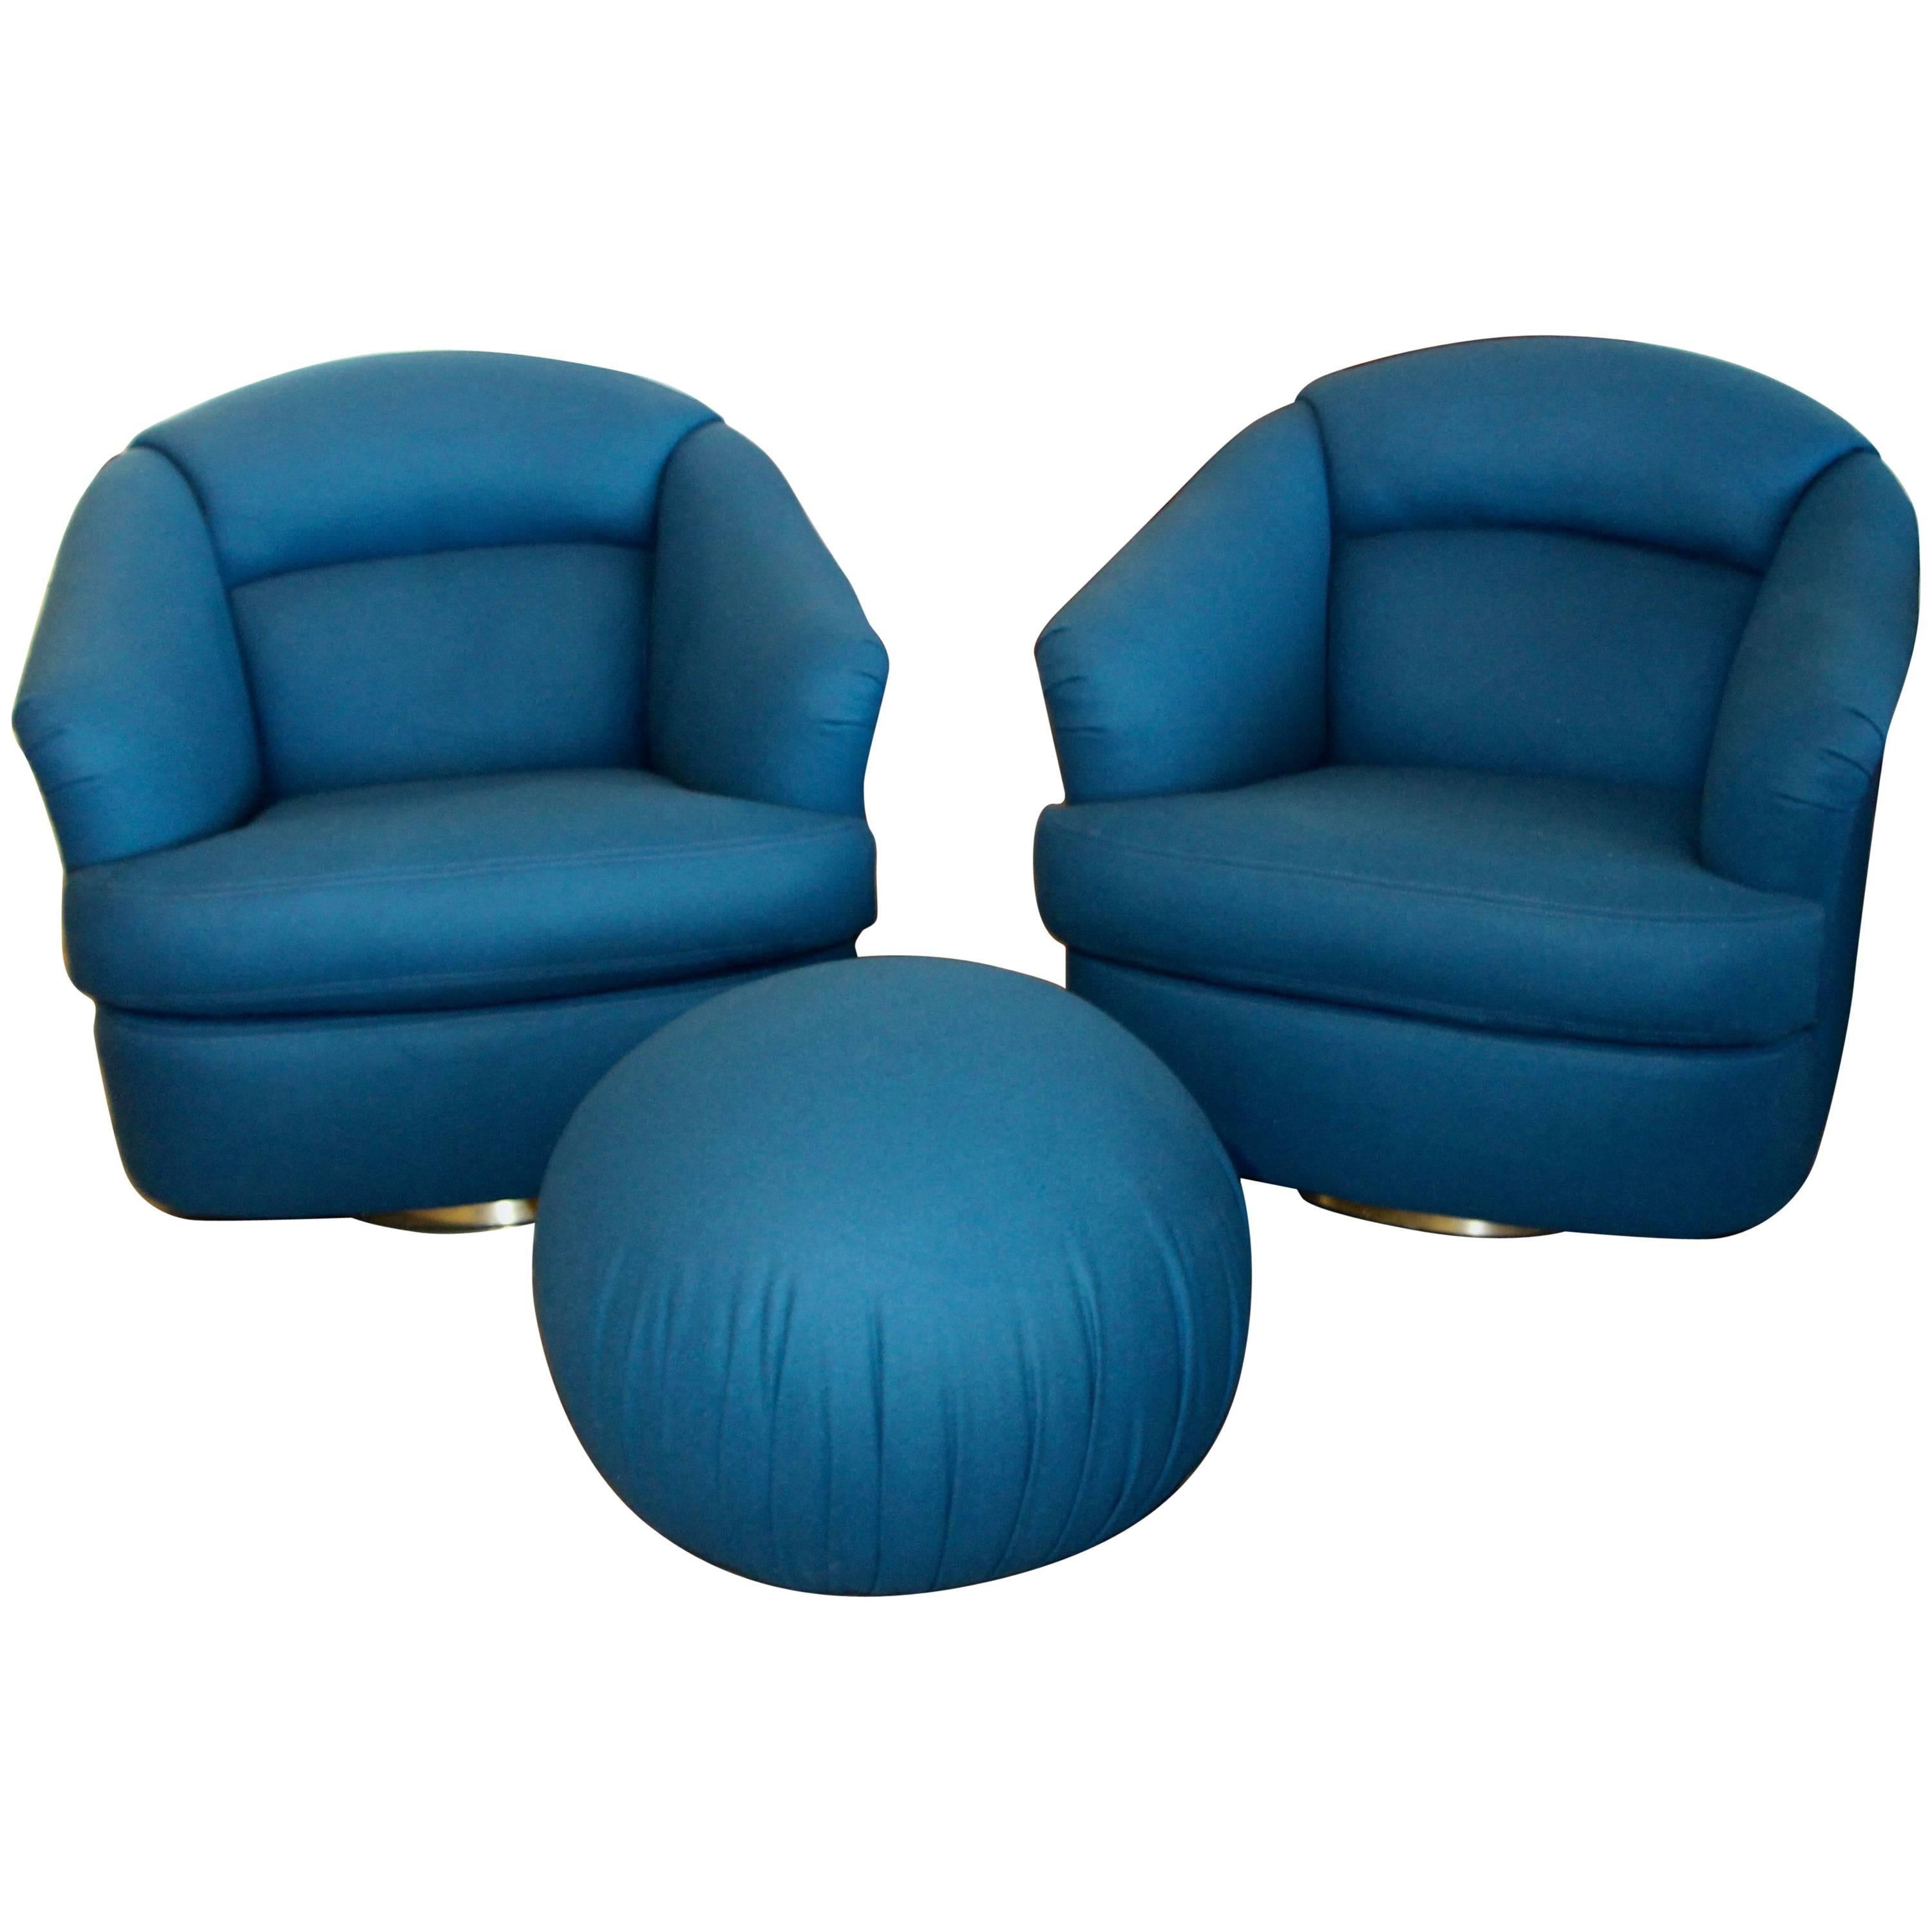 Pair of Chairs with Ottoman from Directional